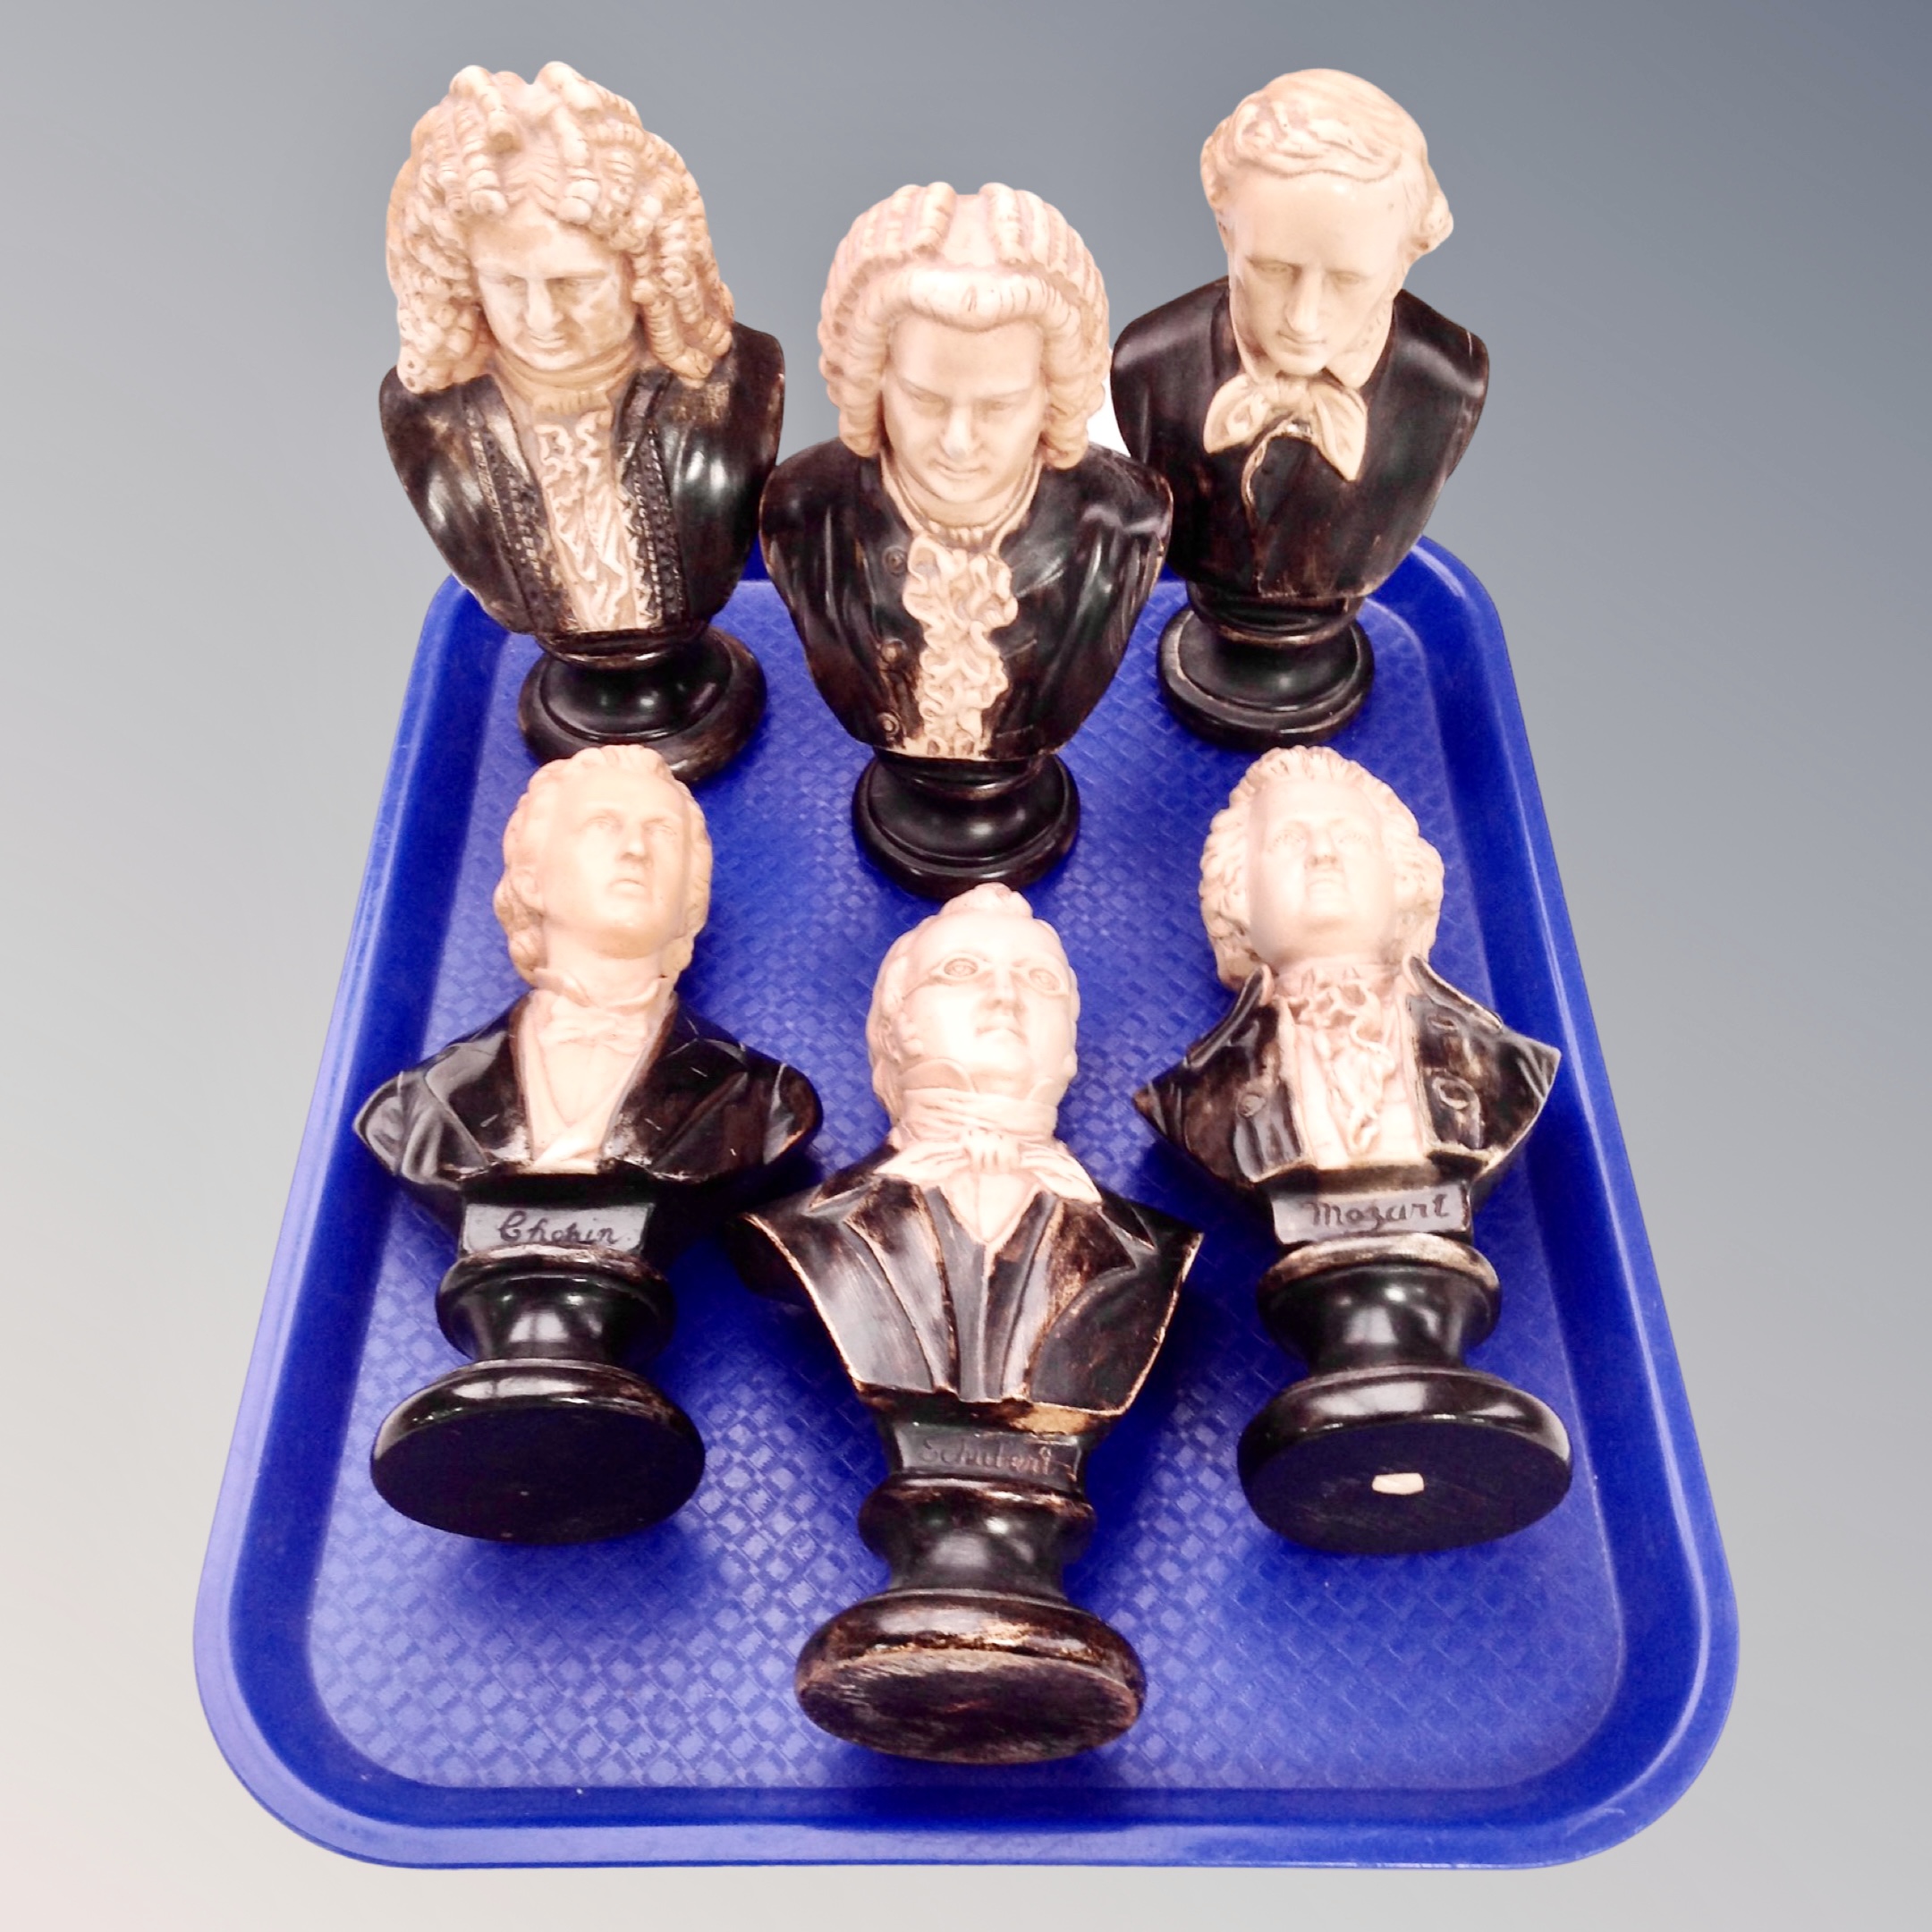 Six busts of music composers